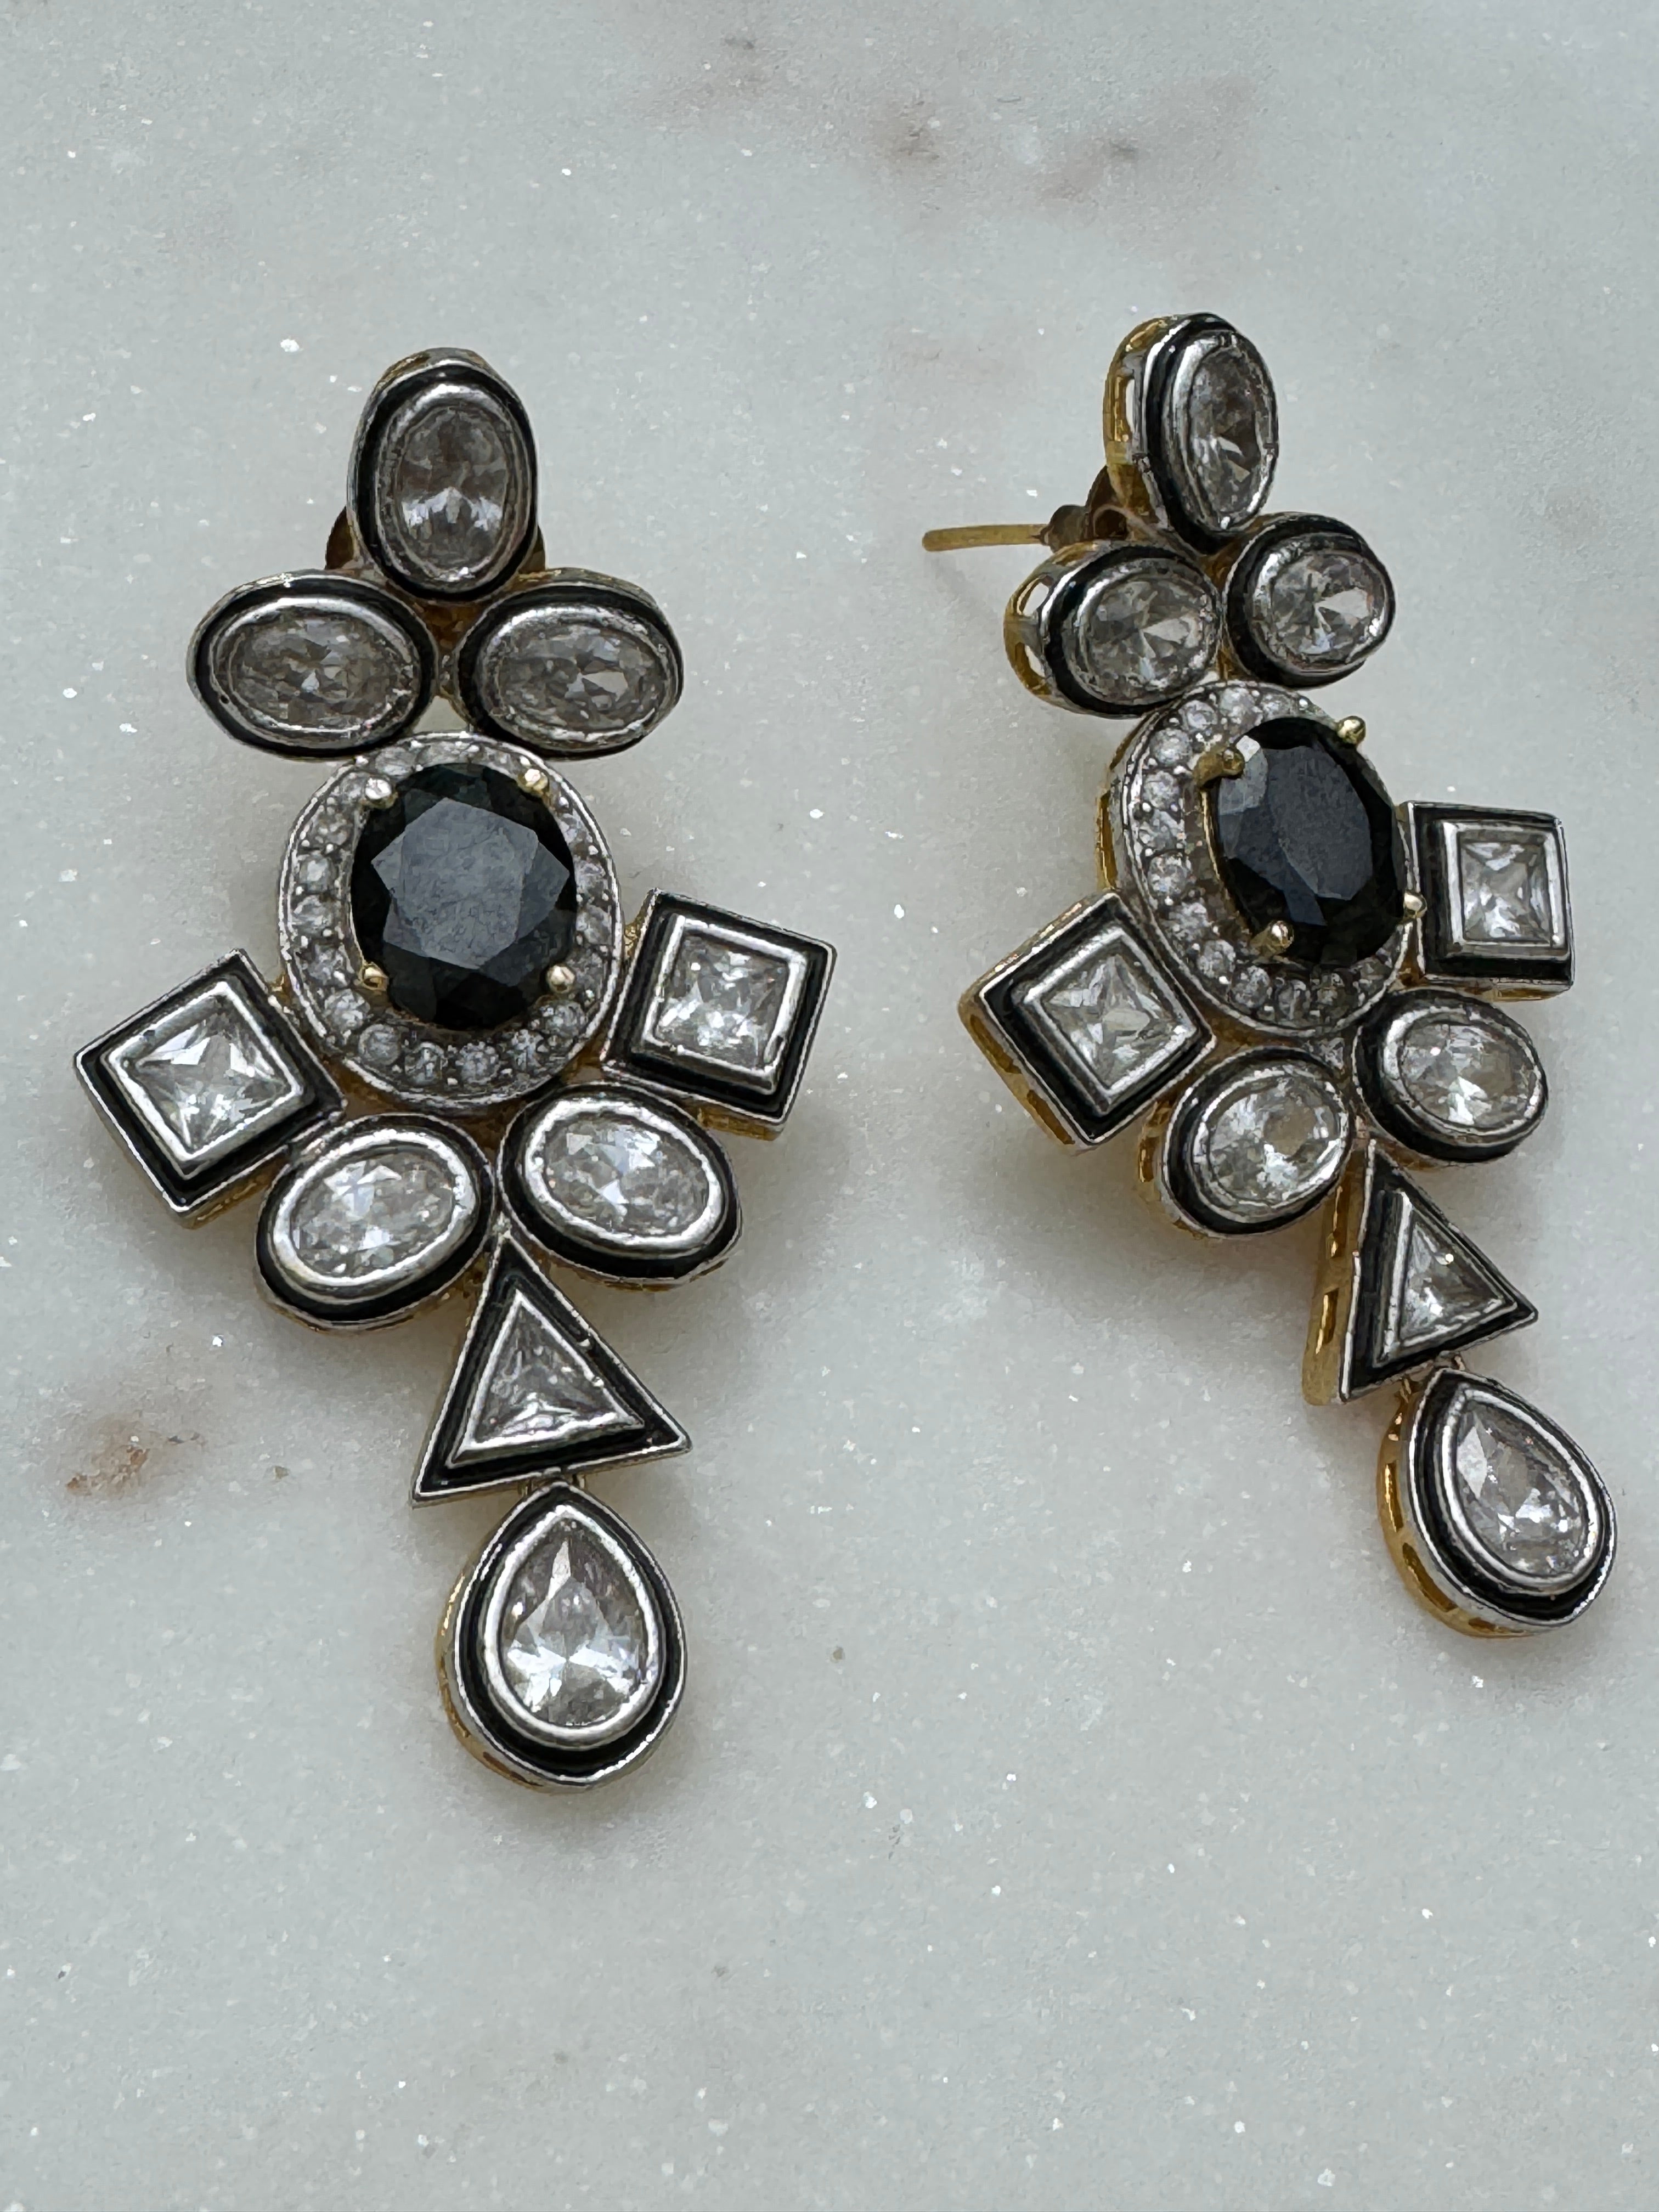 Future Nomads Earrings Black Spinel & Crystal Earrings Gold Plated